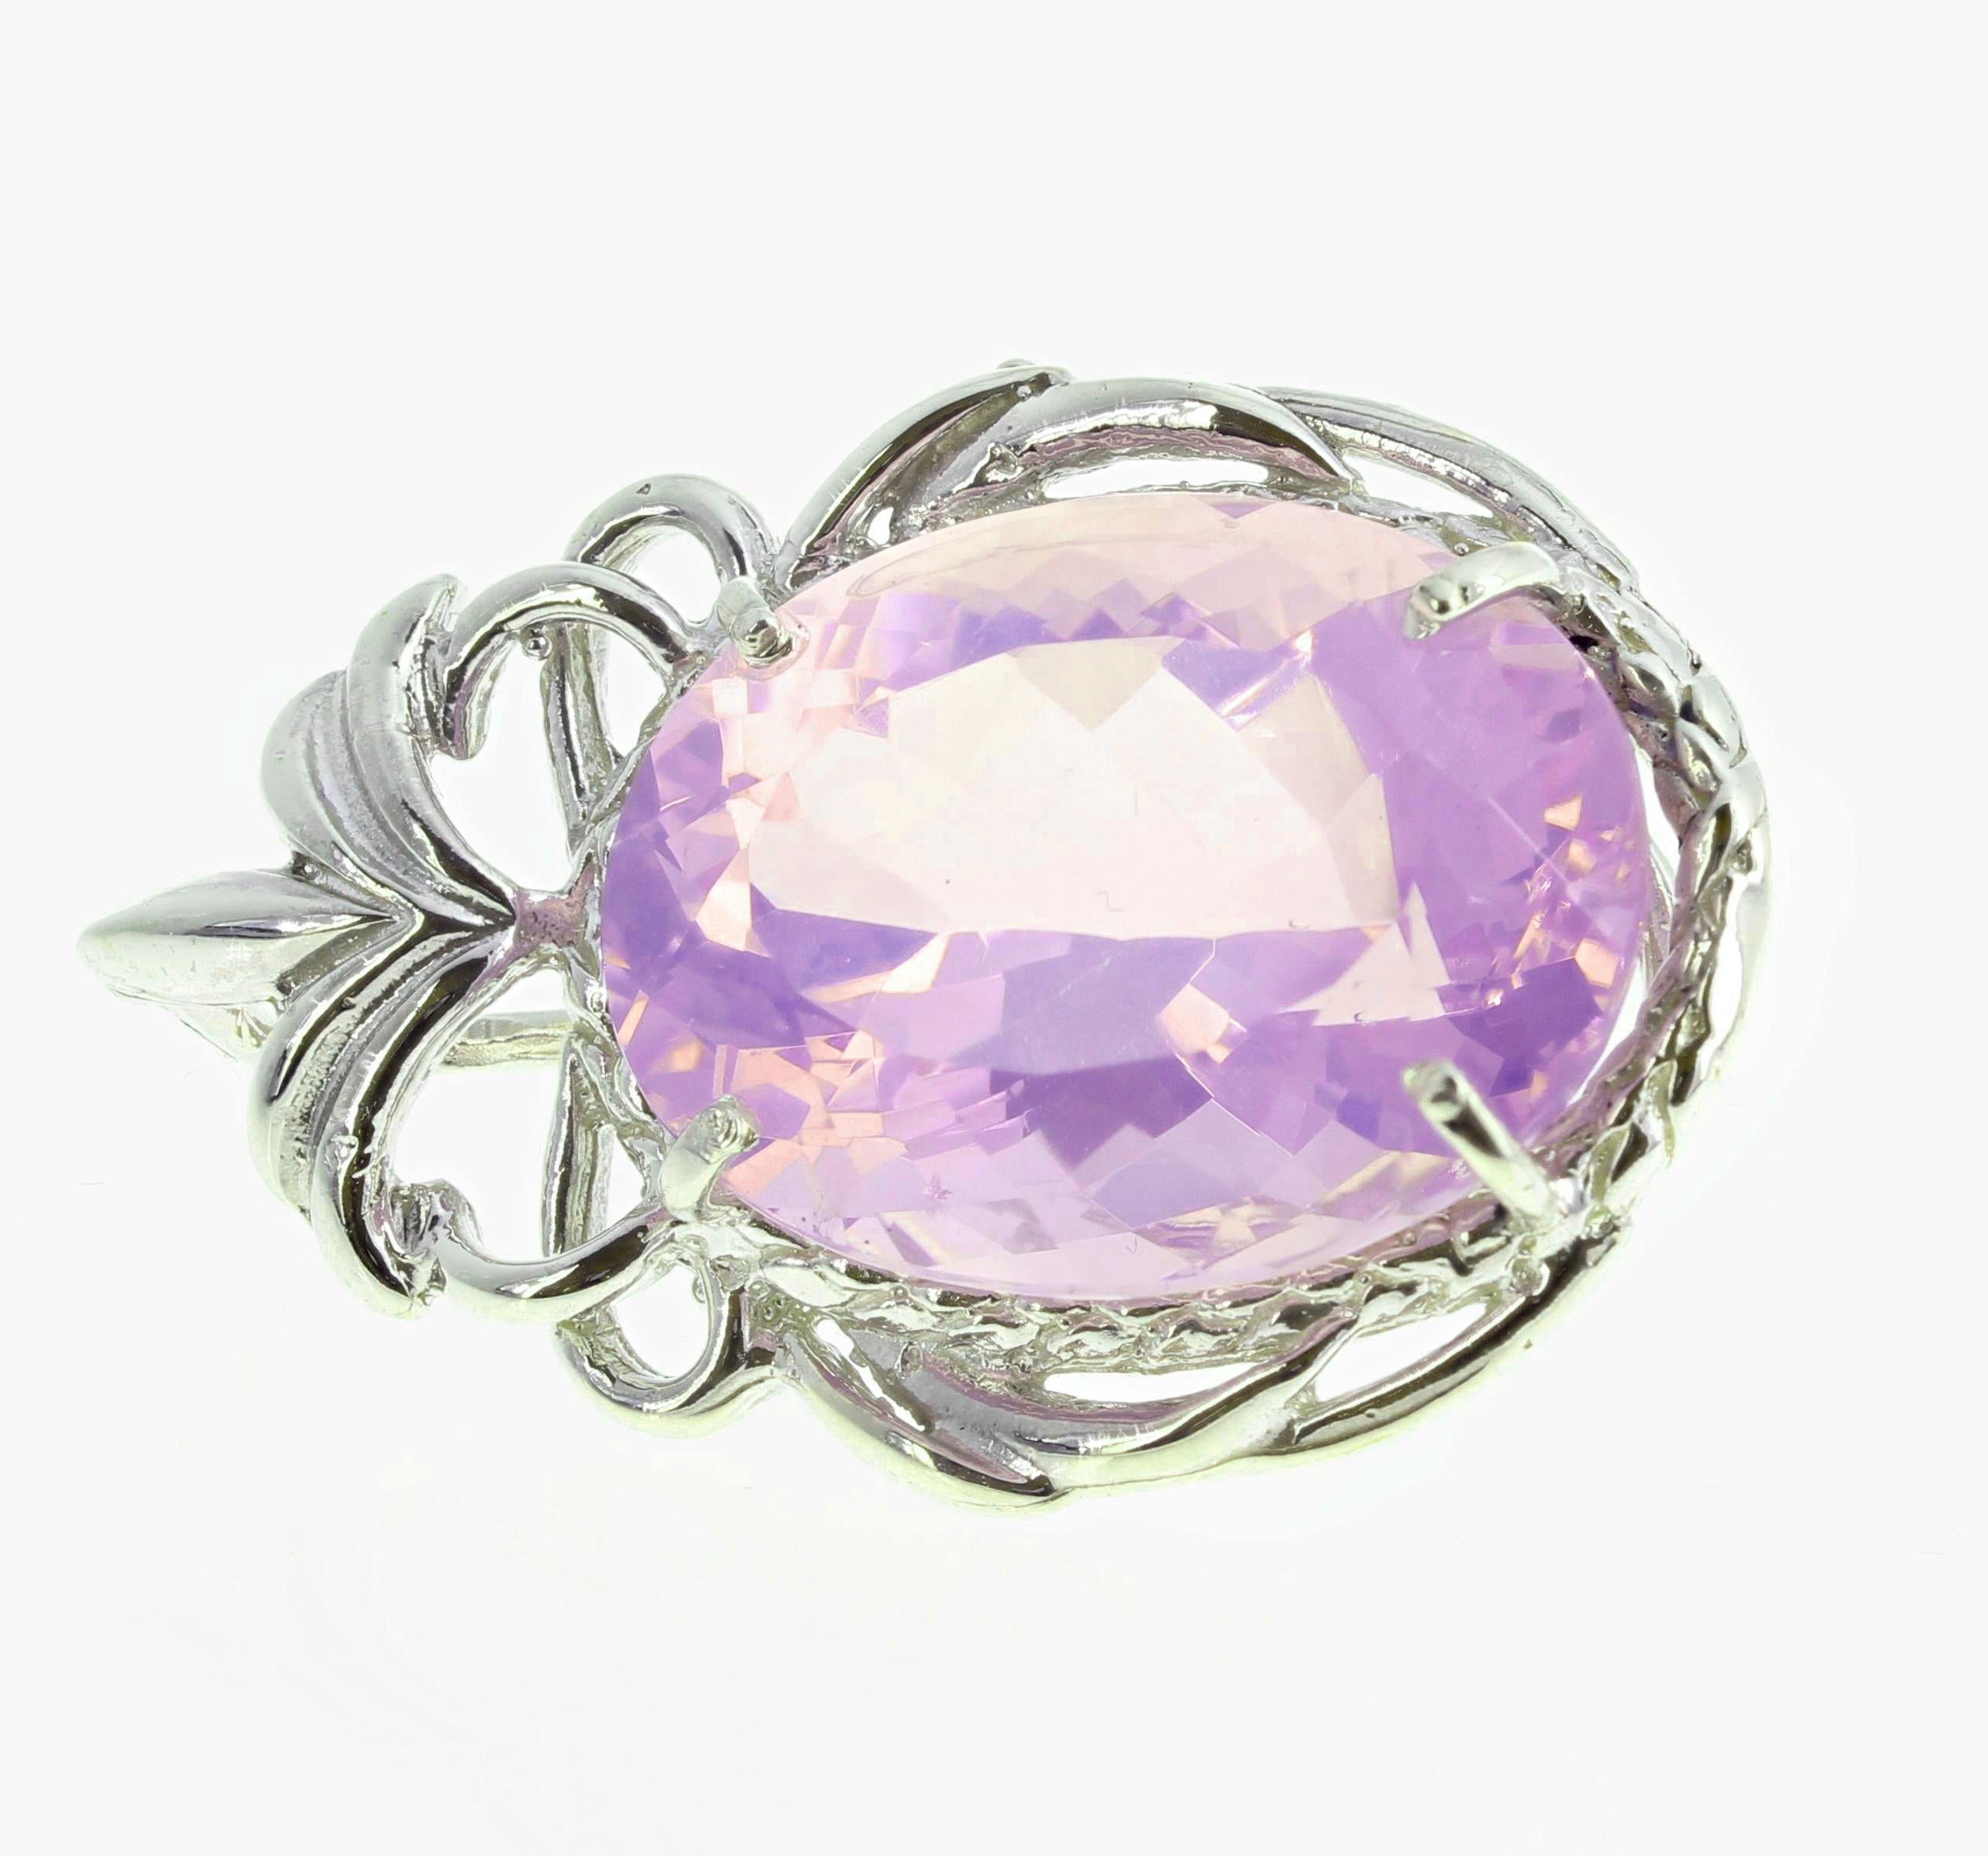 Oval Cut AJD Beautiful RARE 41 Cts of Natural Lavender Amethyst Sterling Pendant For Sale